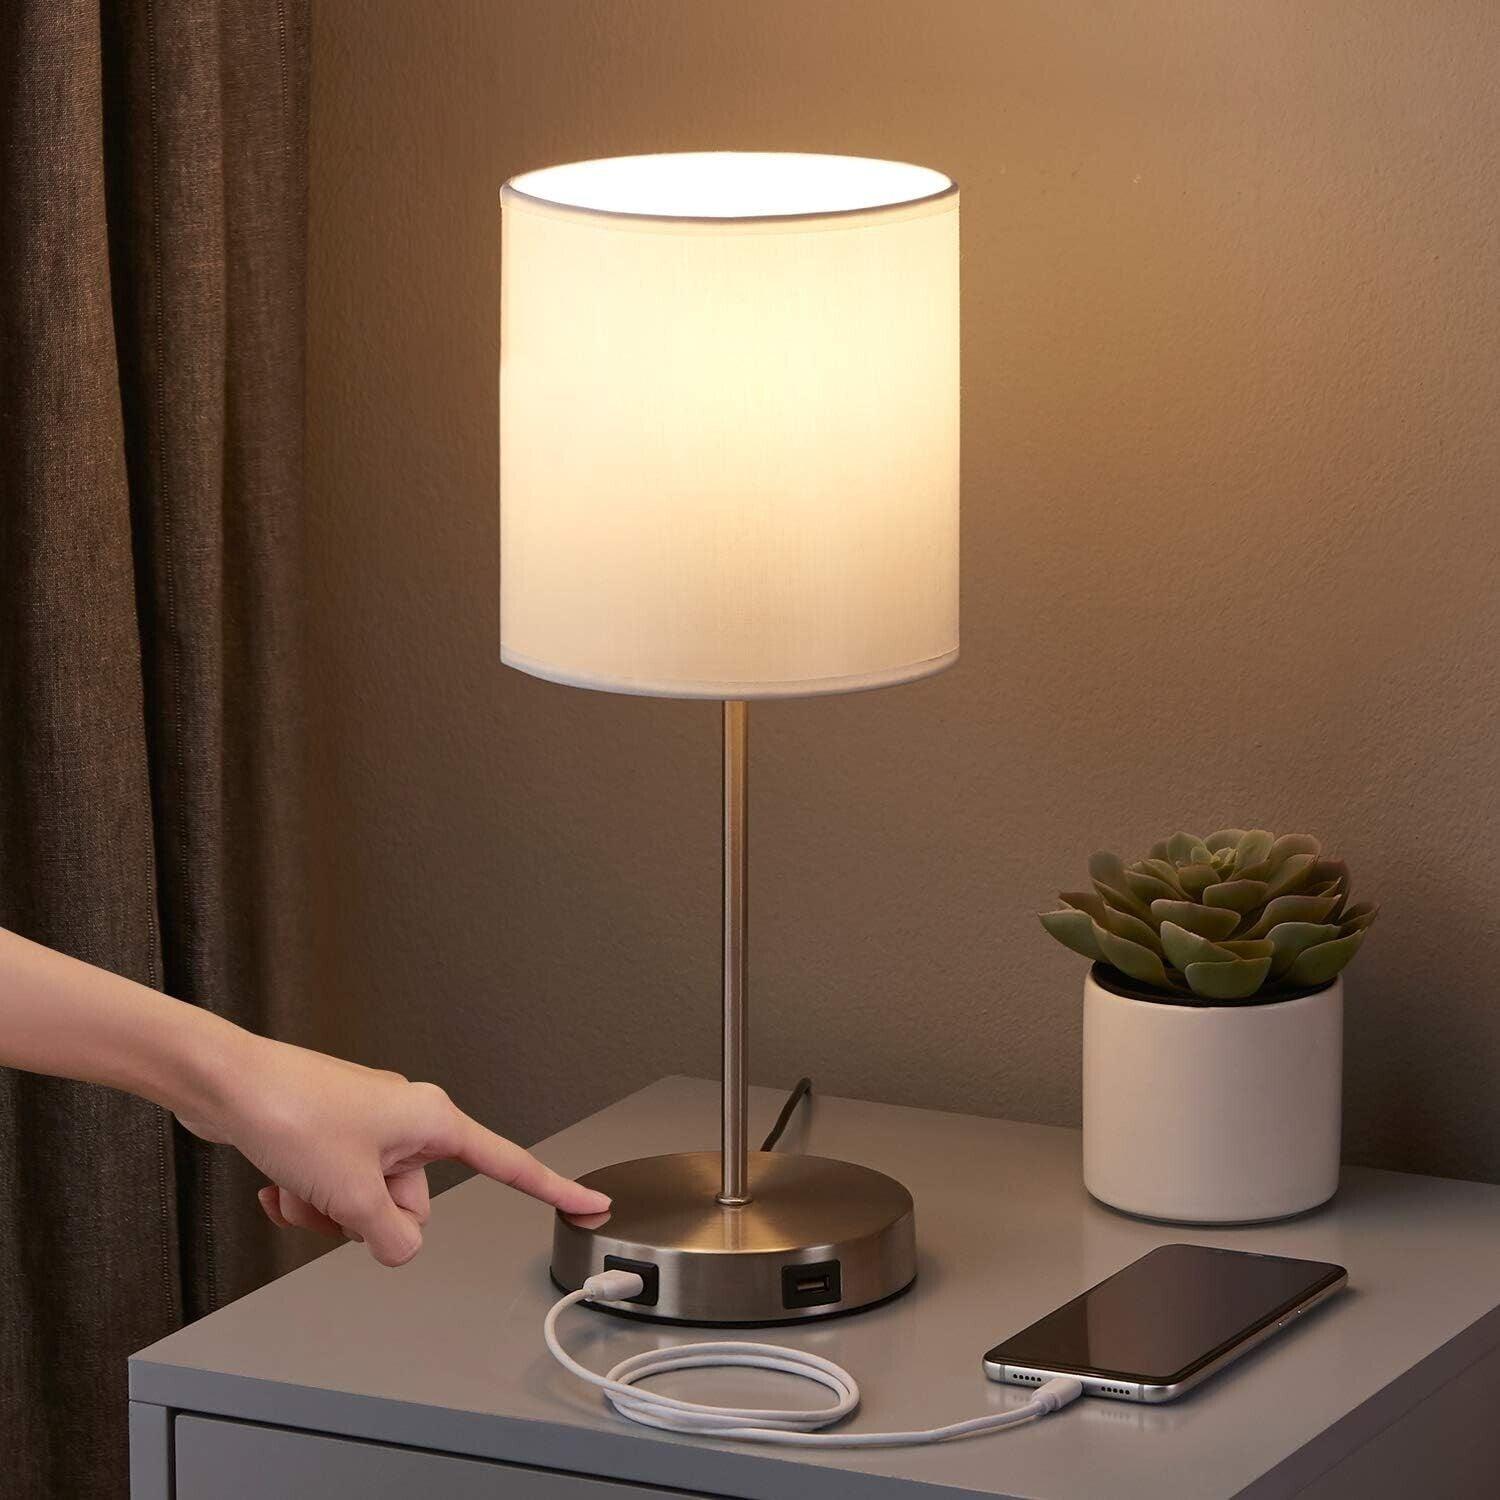 Touch Control Table Lamp with 2 USB Charging Ports, 3 Way Dimmable - Massive Discounts